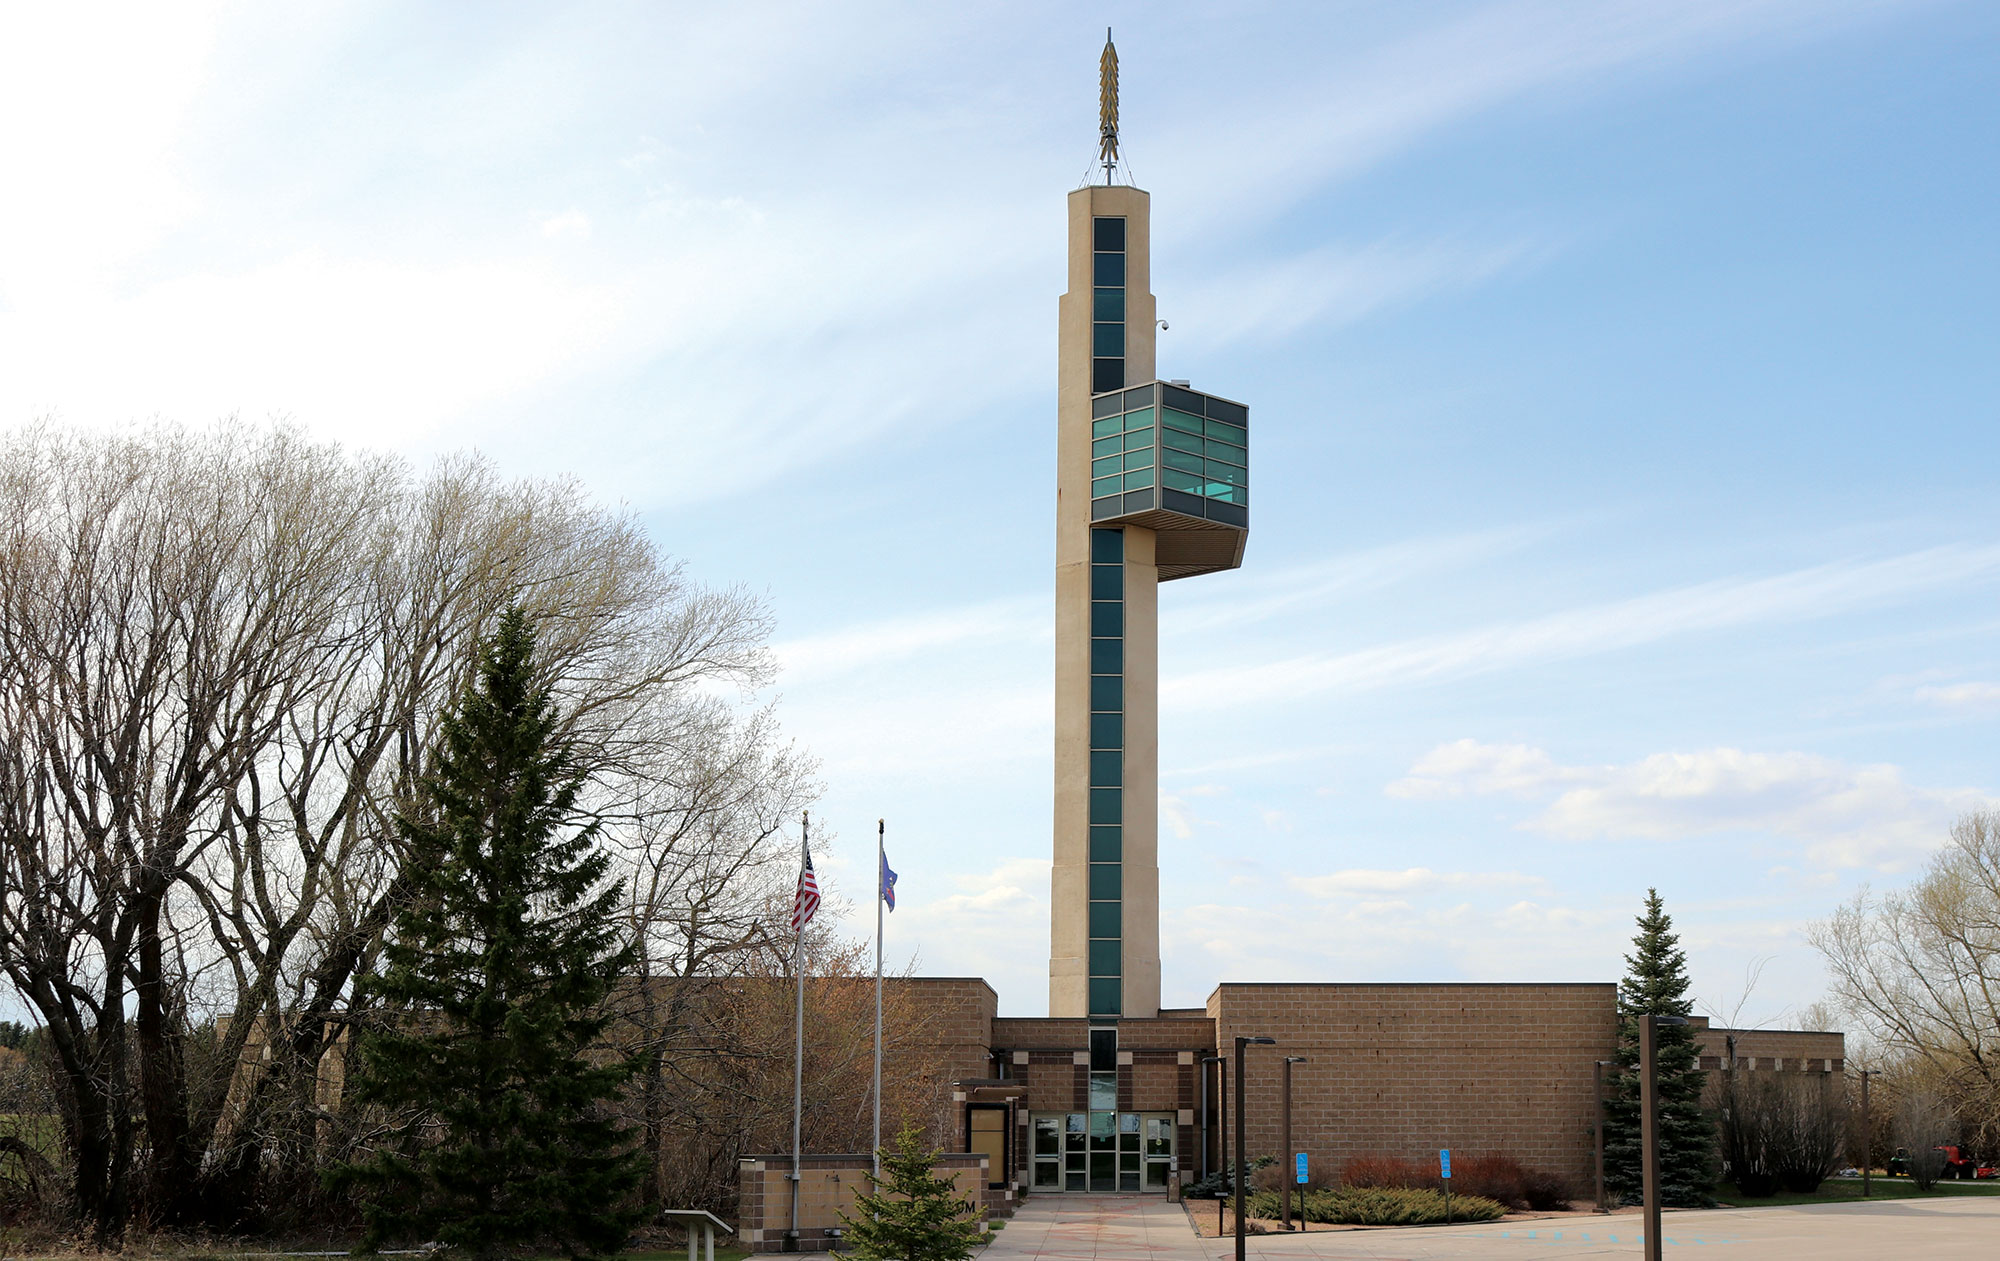 the exterior of a brick building is shown with a tall tower coming up from the middle of it